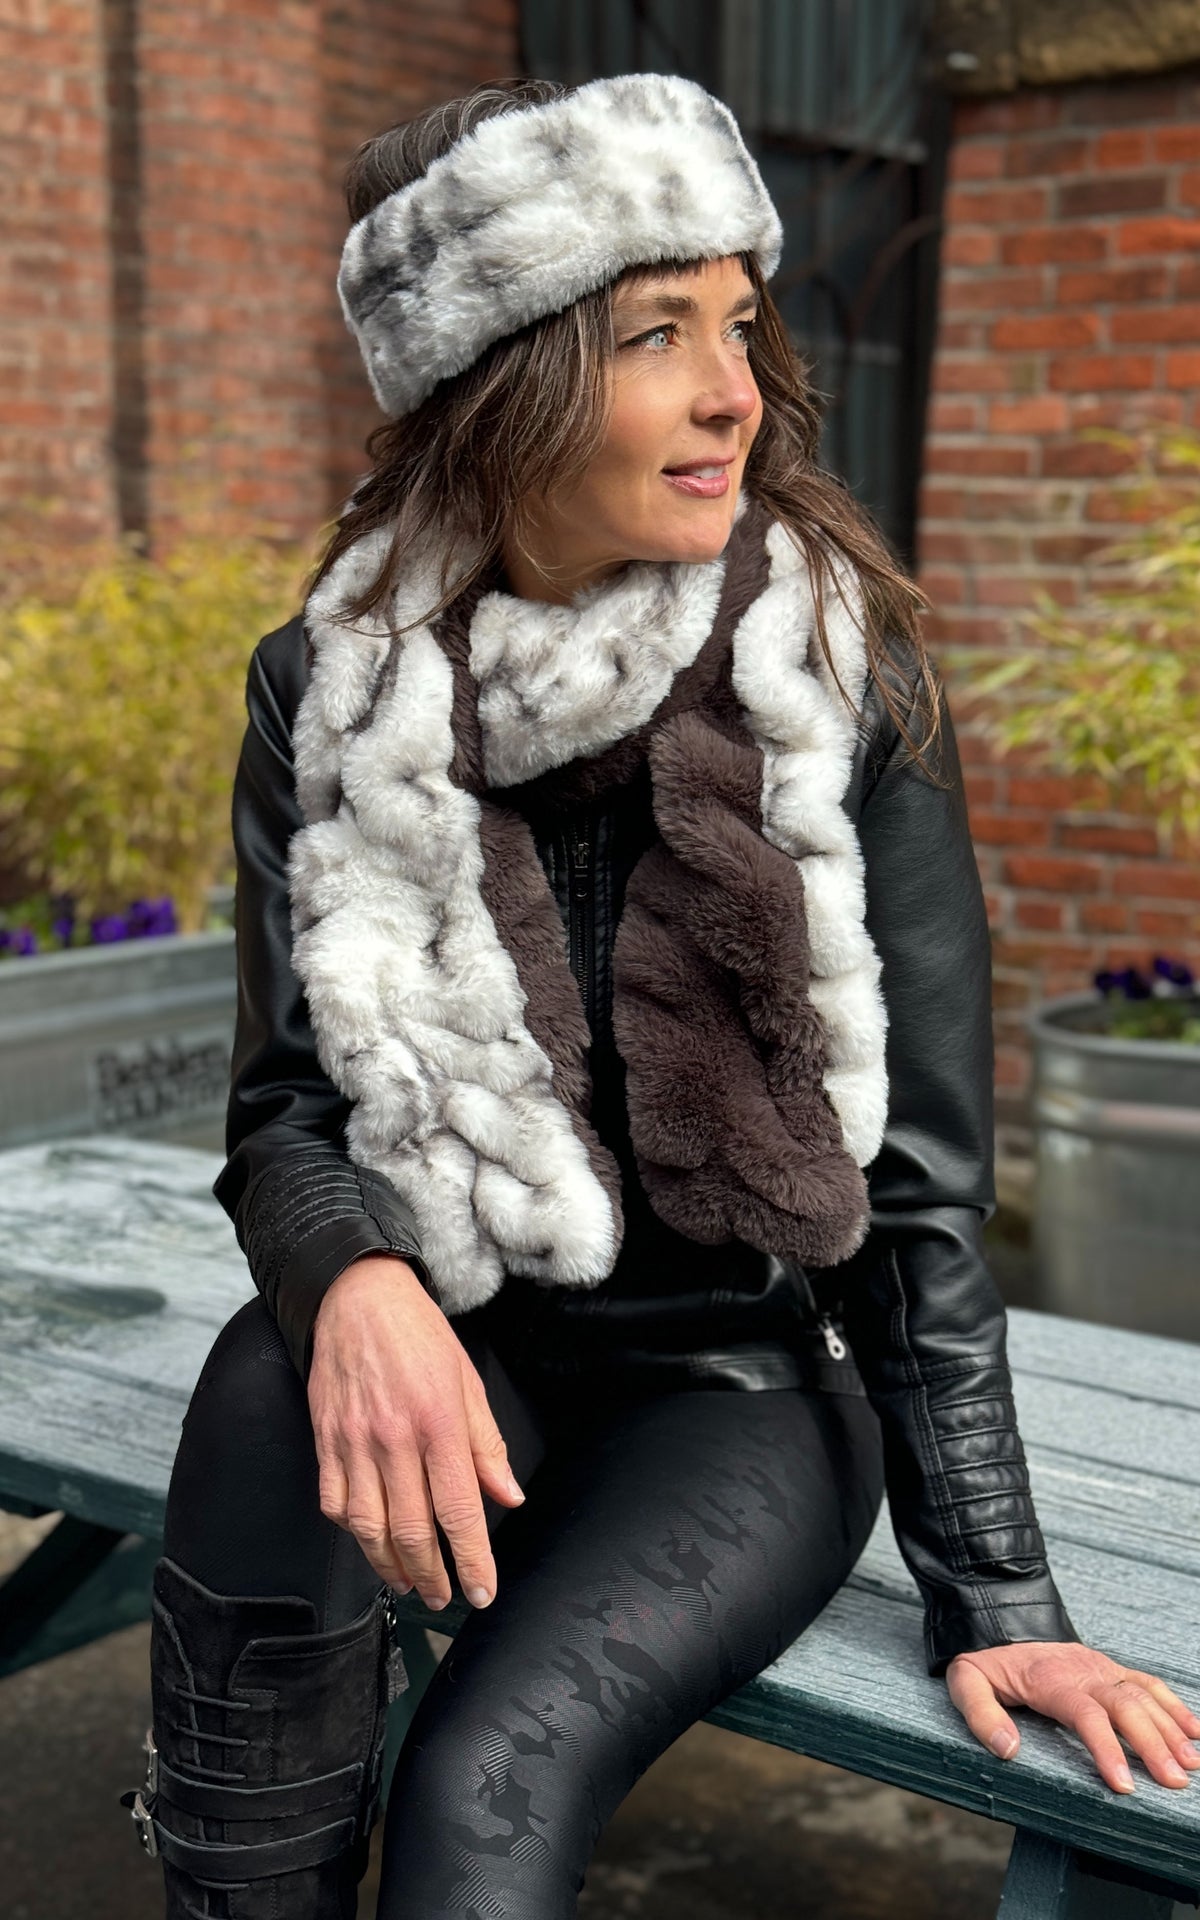 Two-Tone Scarf and Ear Neck Cozy Narrow on model | Aspen and Mink Gray  Royal Opulence Faux Fur | Handmade USA Pandemonium Seattle